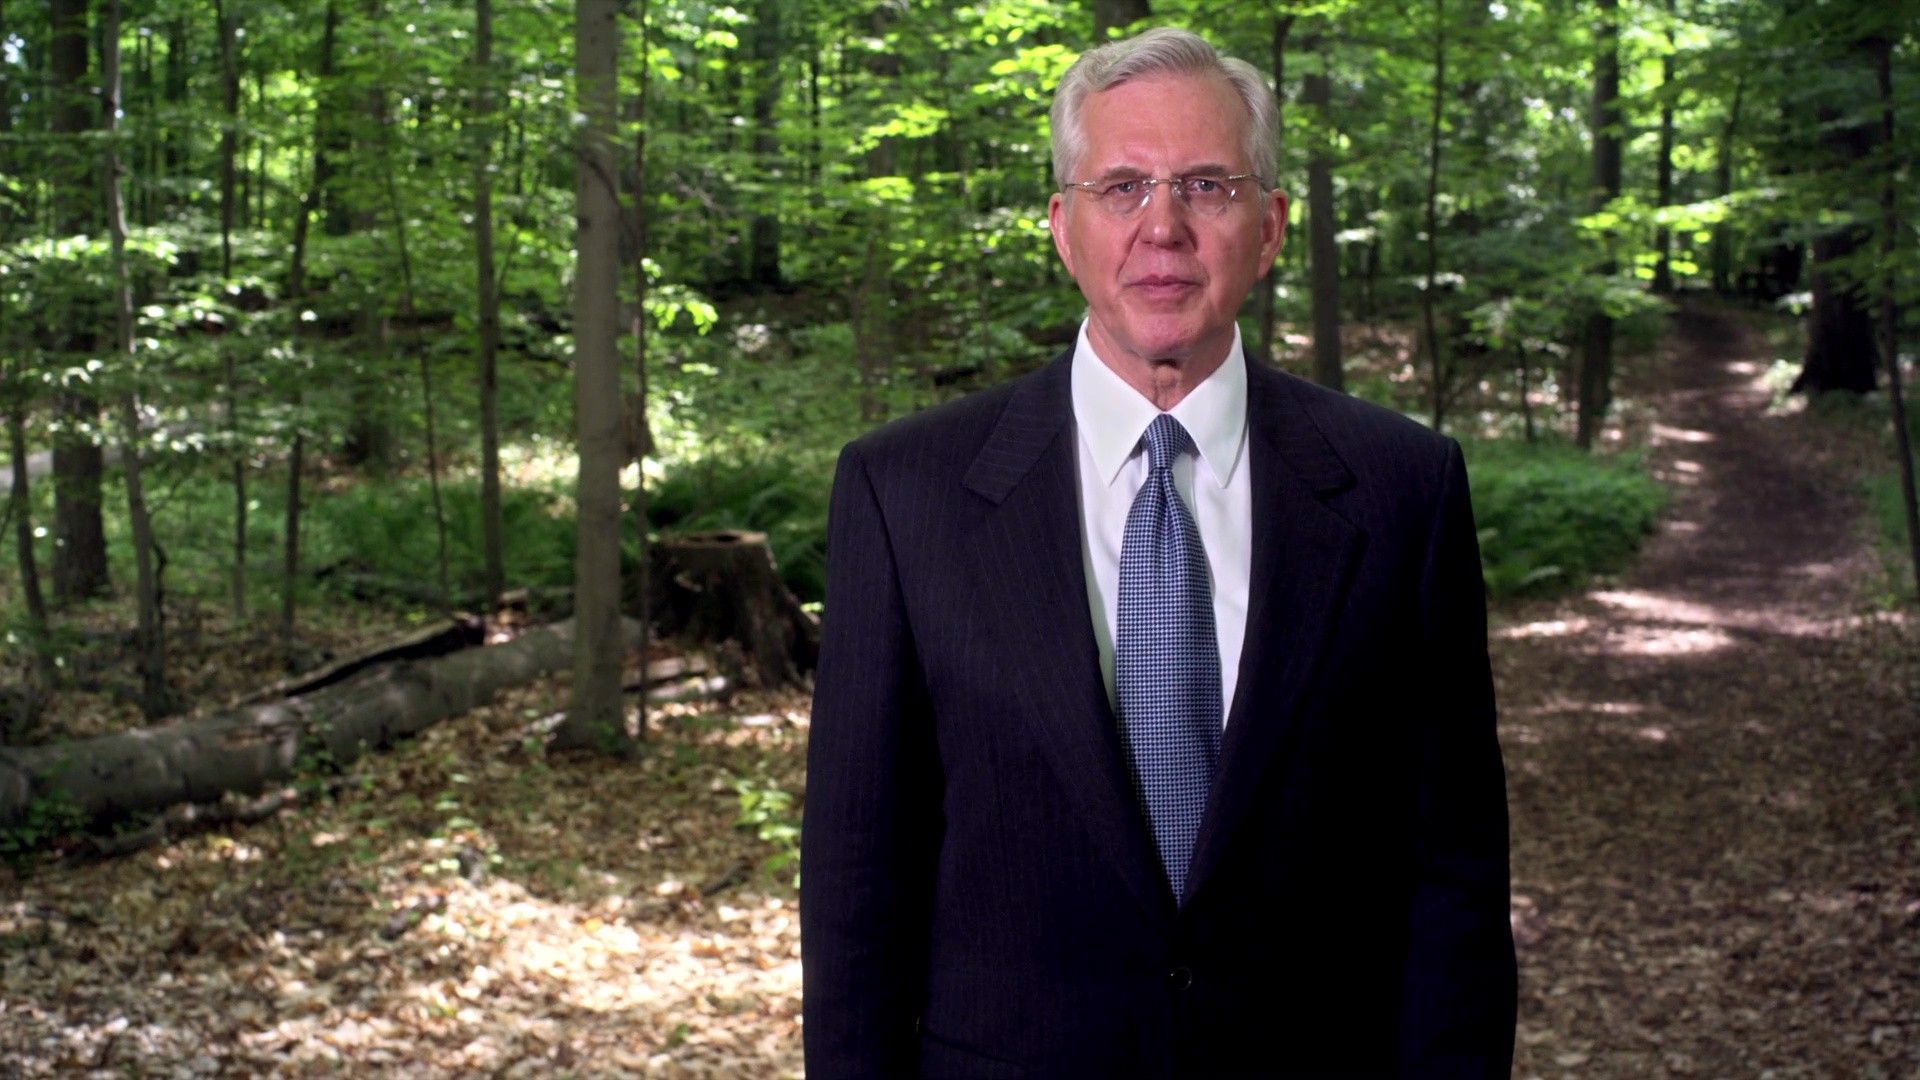 Elder D. Todd Christofferson bears his testimony that Joseph Smith saw God the Father and Jesus Christ in the Sacred Grove.